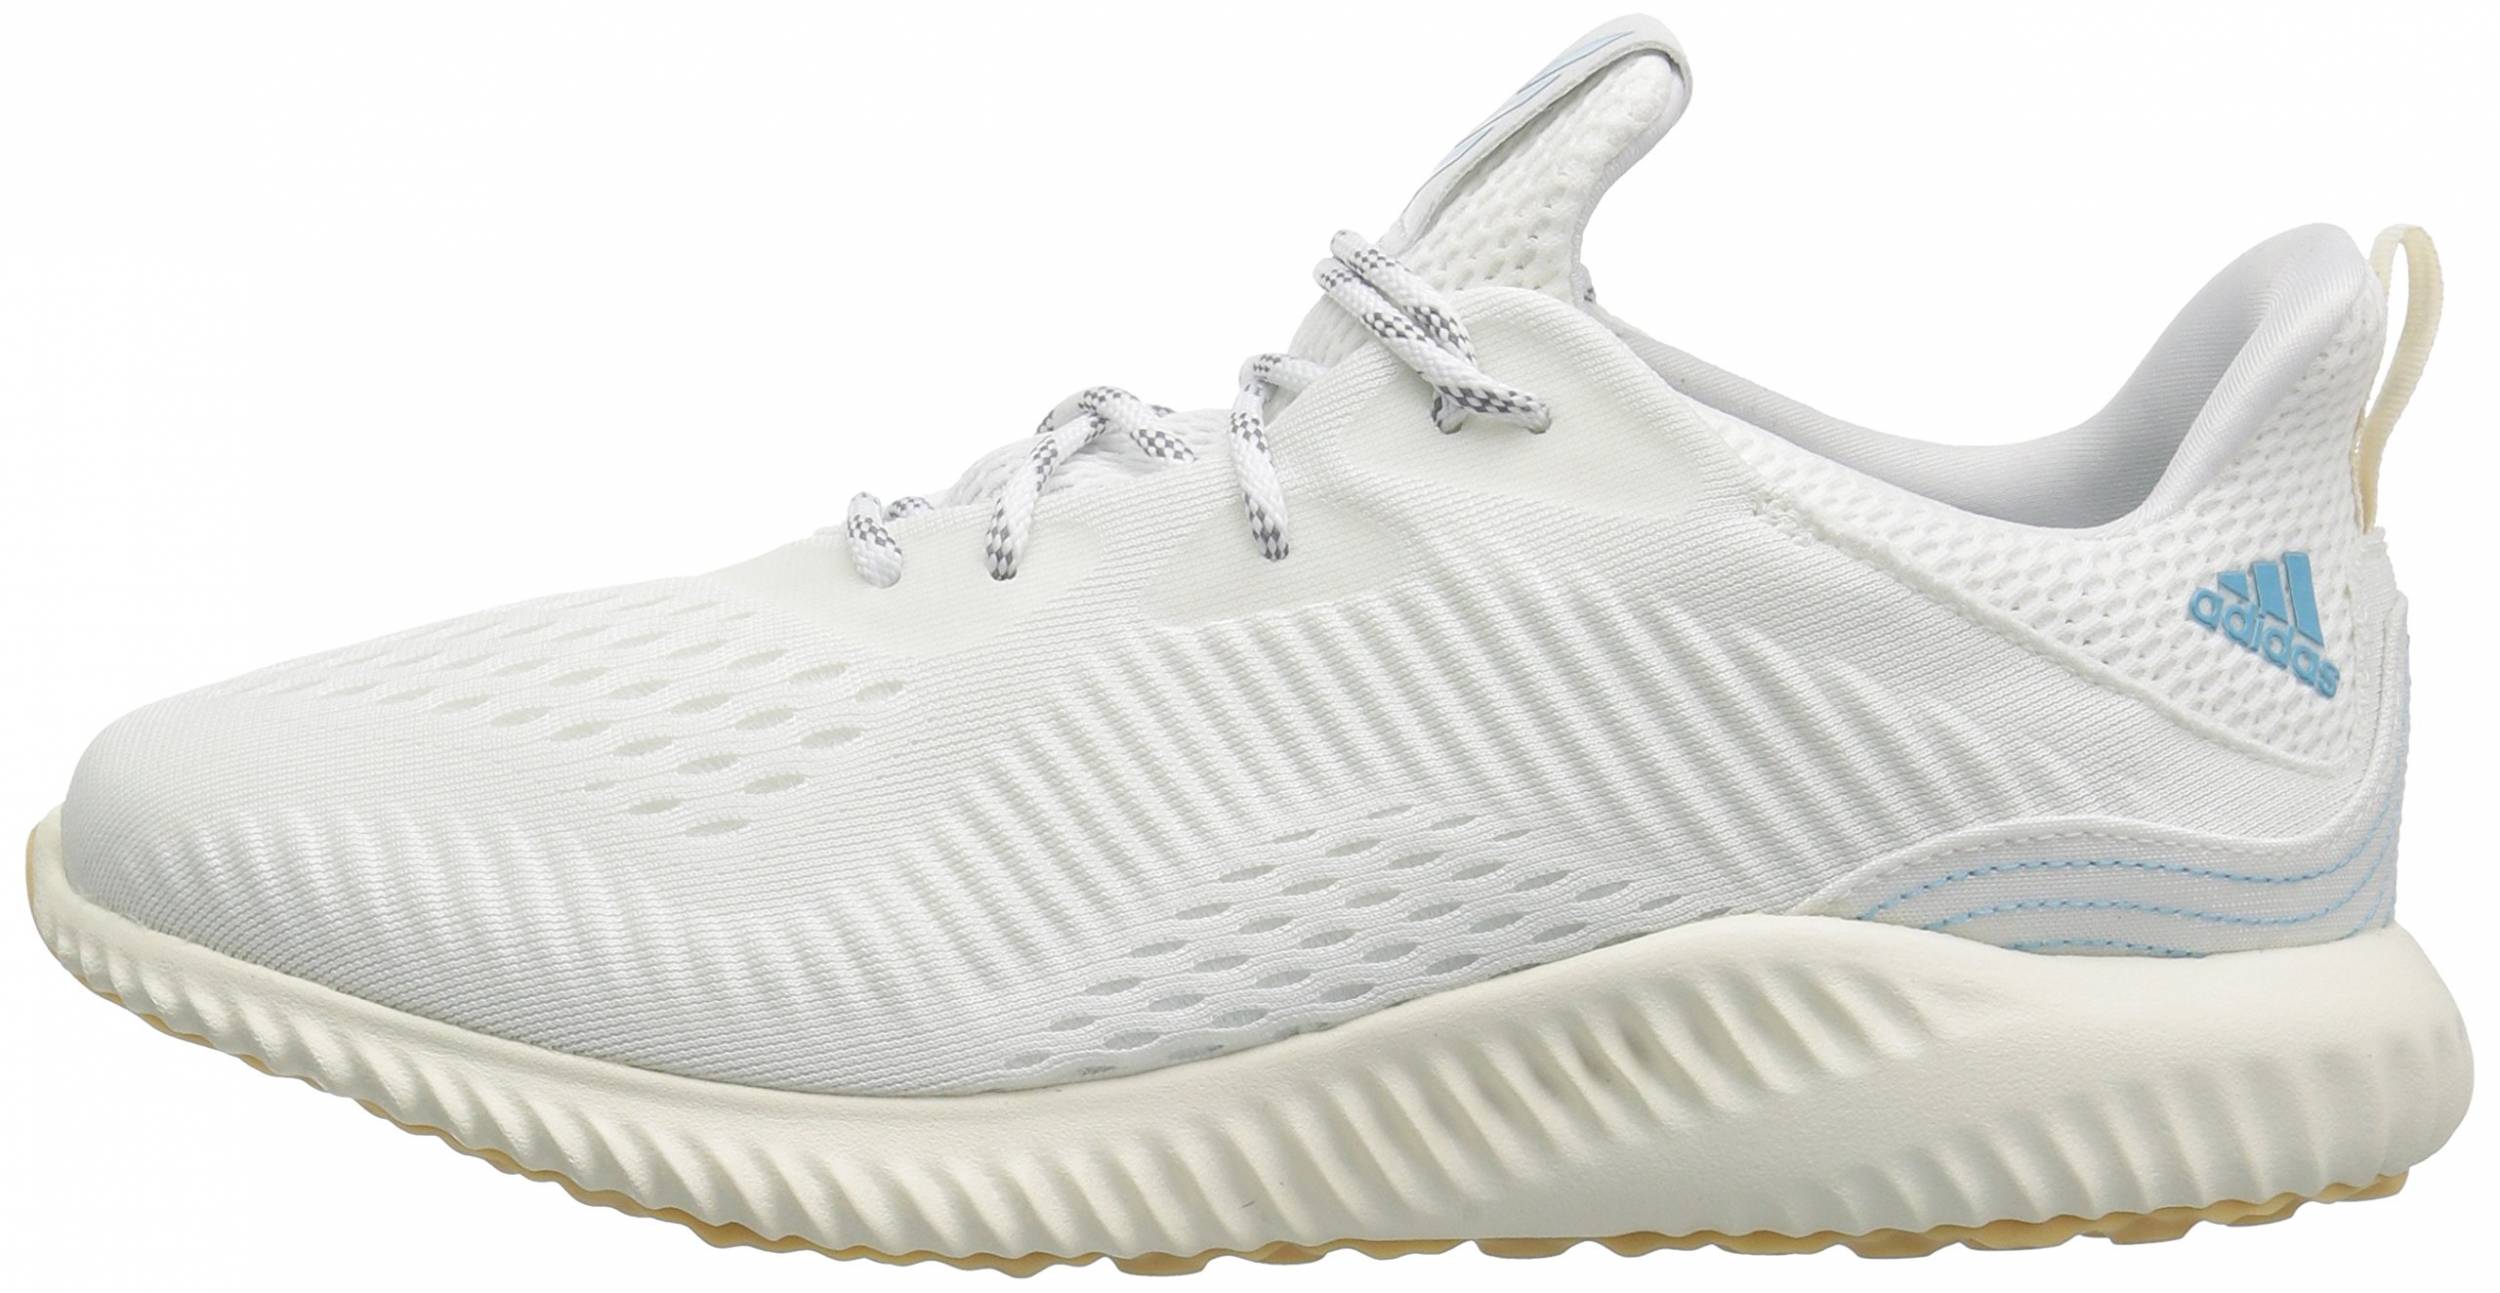 Retaliation translator Daytime Adidas Alphabounce Parley Review 2022, Facts, Deals | RunRepeat